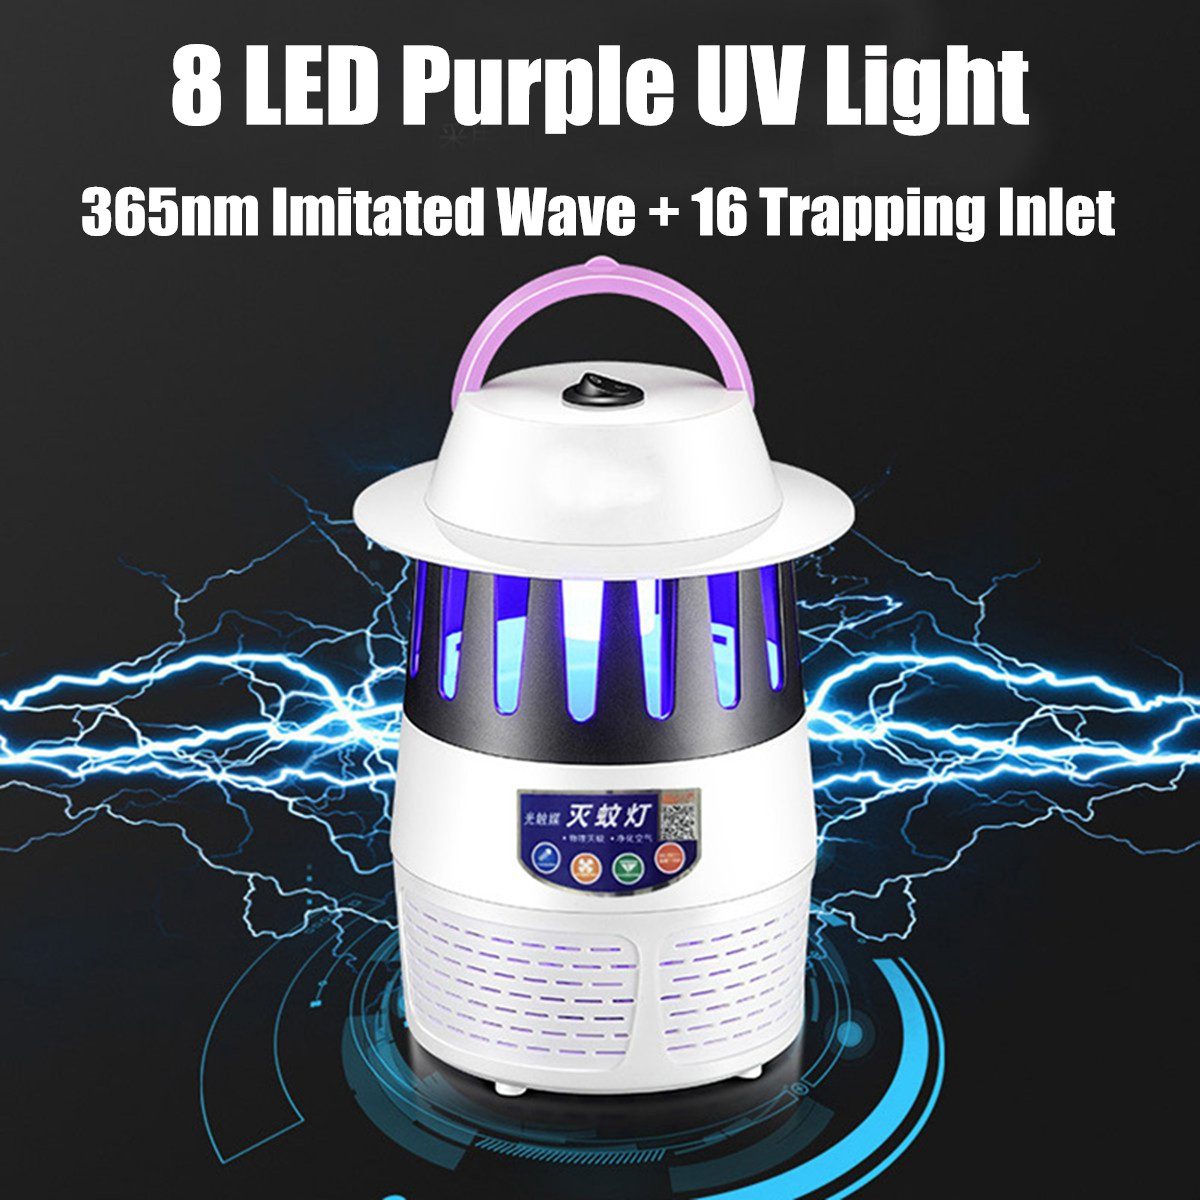 8 LED USB Mosquito Dispeller Repeller Mosquito Killer Lamp Bulb Electric Bug Insect Zapper Pest Trap Light For Yard Outdoor Camping 7